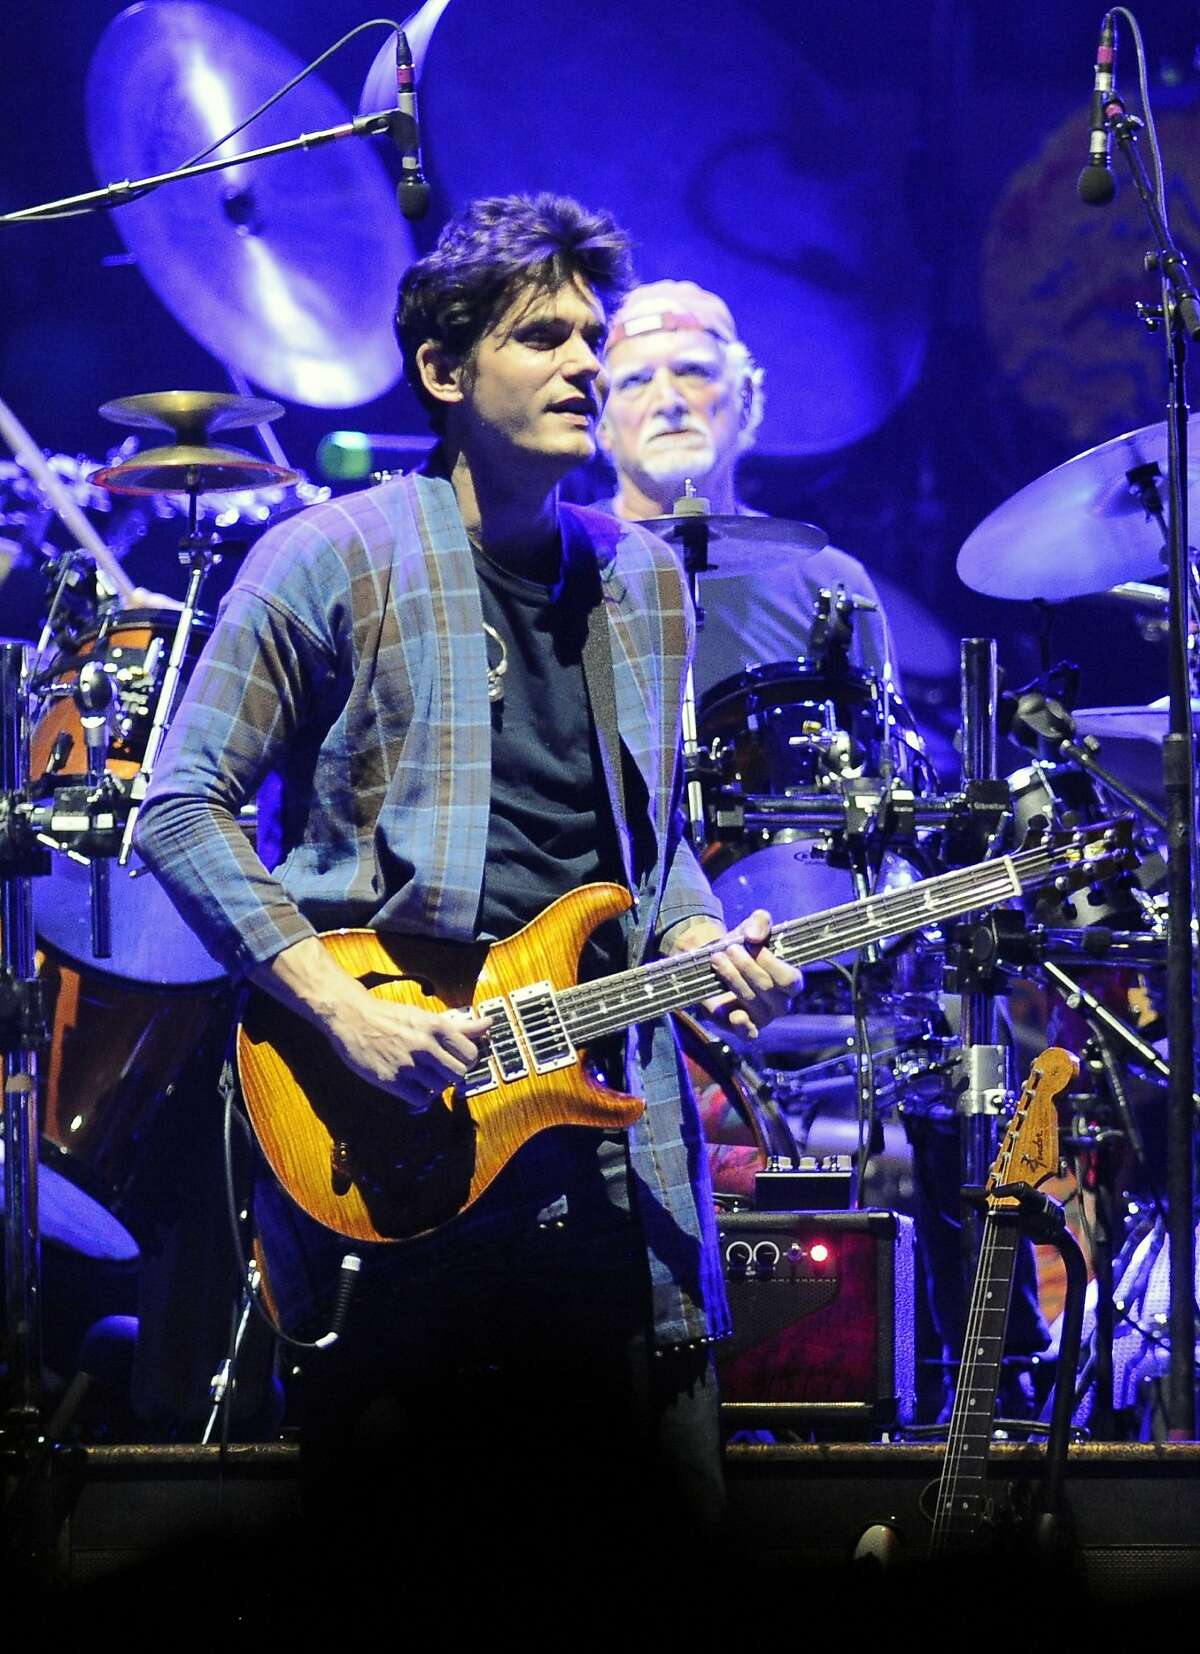 John Mayer ,left, plays with Grateful Dead members Mickey Hart, Bill Kreutzmann, Bob Weir, and musicians Oteil Burbridge, and Jeff Chimenti to form the band Dead & Company during a show at Times Union Center in Albany, N.Y.,Thursday, Sept. 29, 2015. (Hans Pennink / Special to the Times Union)